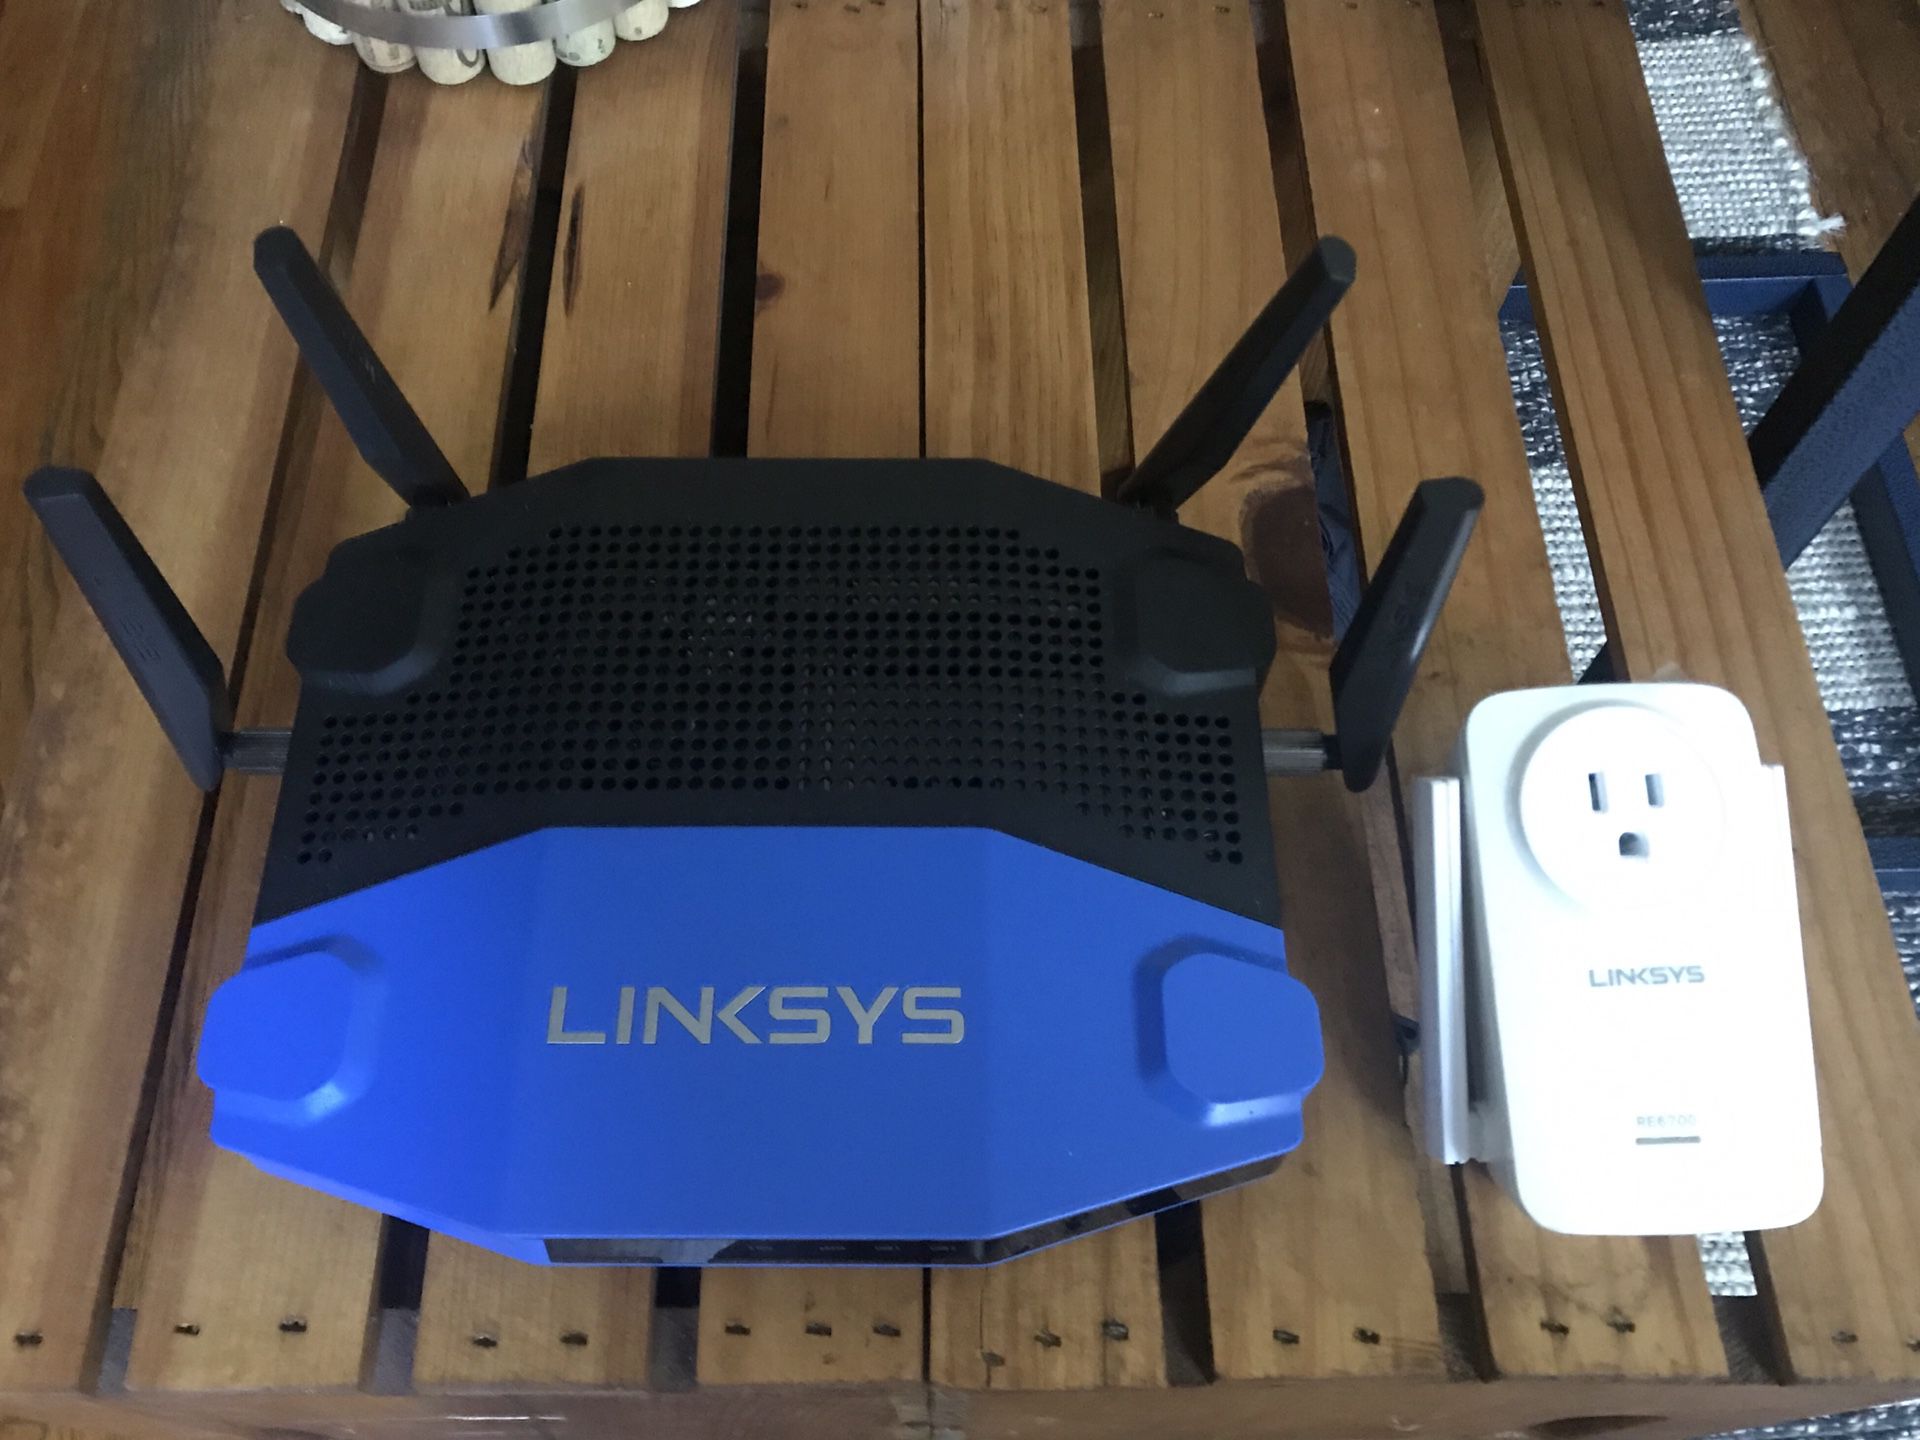 Linksys Dual-Band Professional WiFi Wireless Router + Extender